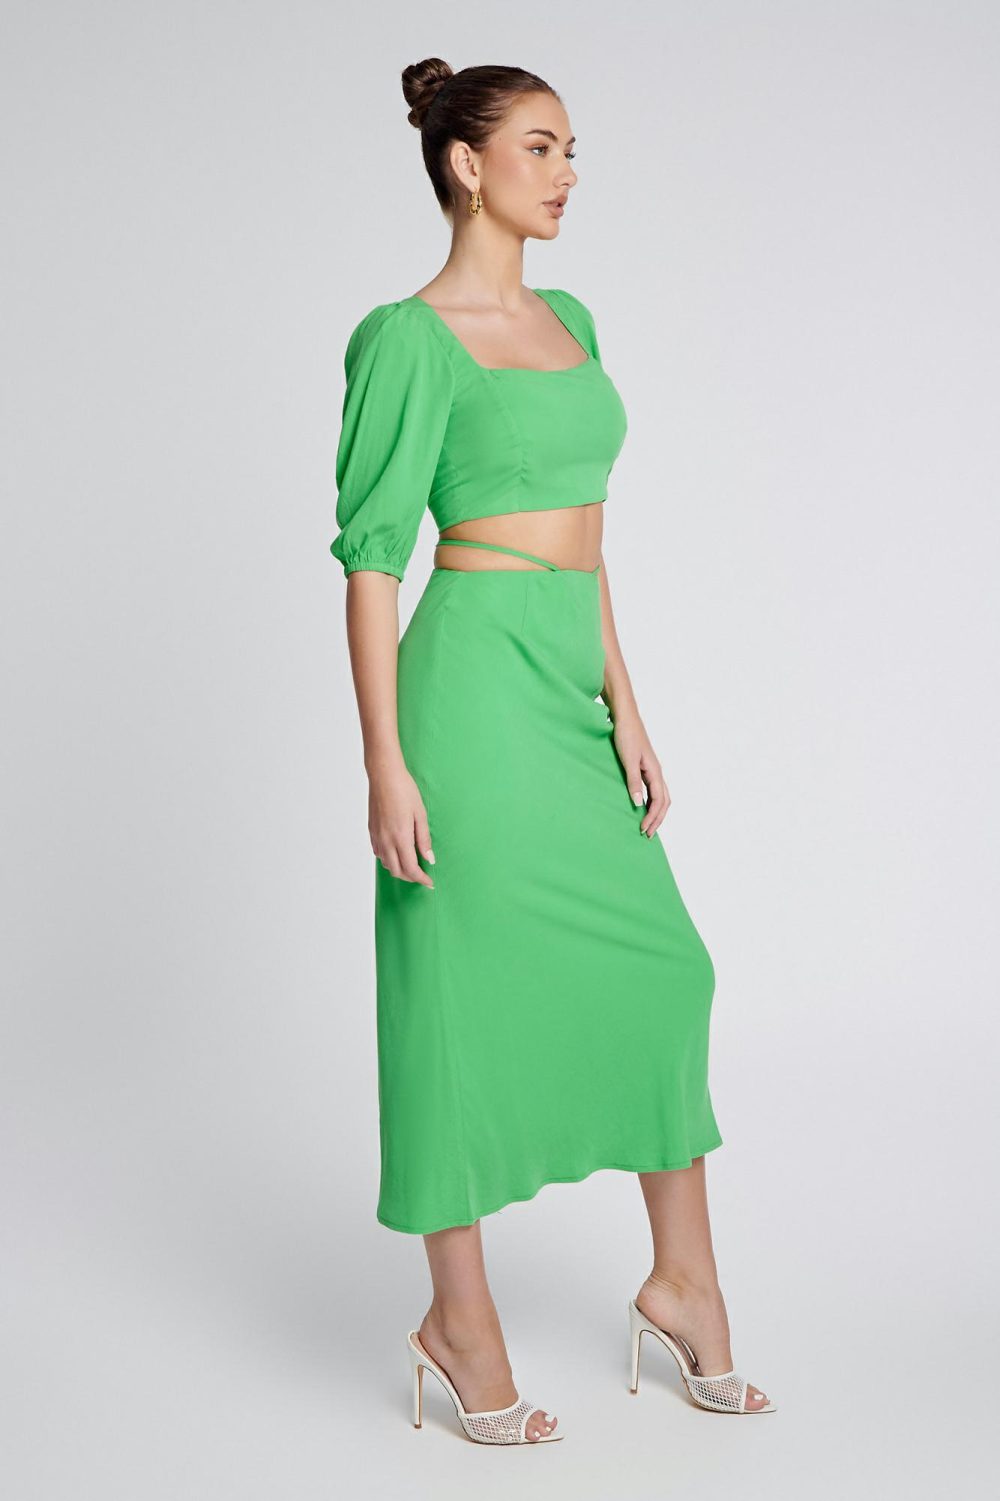 Ladies Skirt Colour is Green